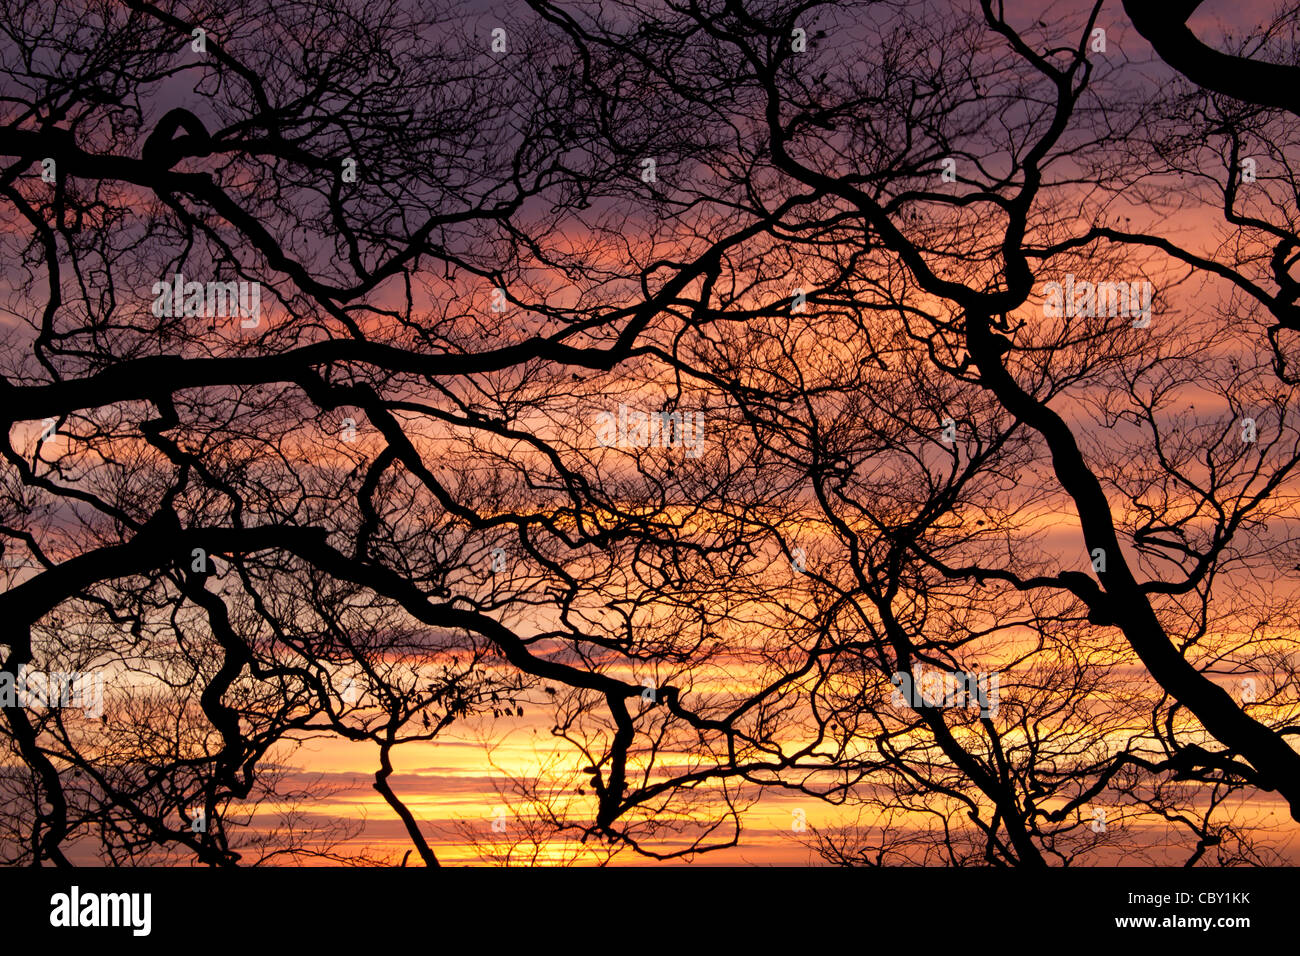 The branches and twigs of a beech tree photographed at sunset. Stock Photo